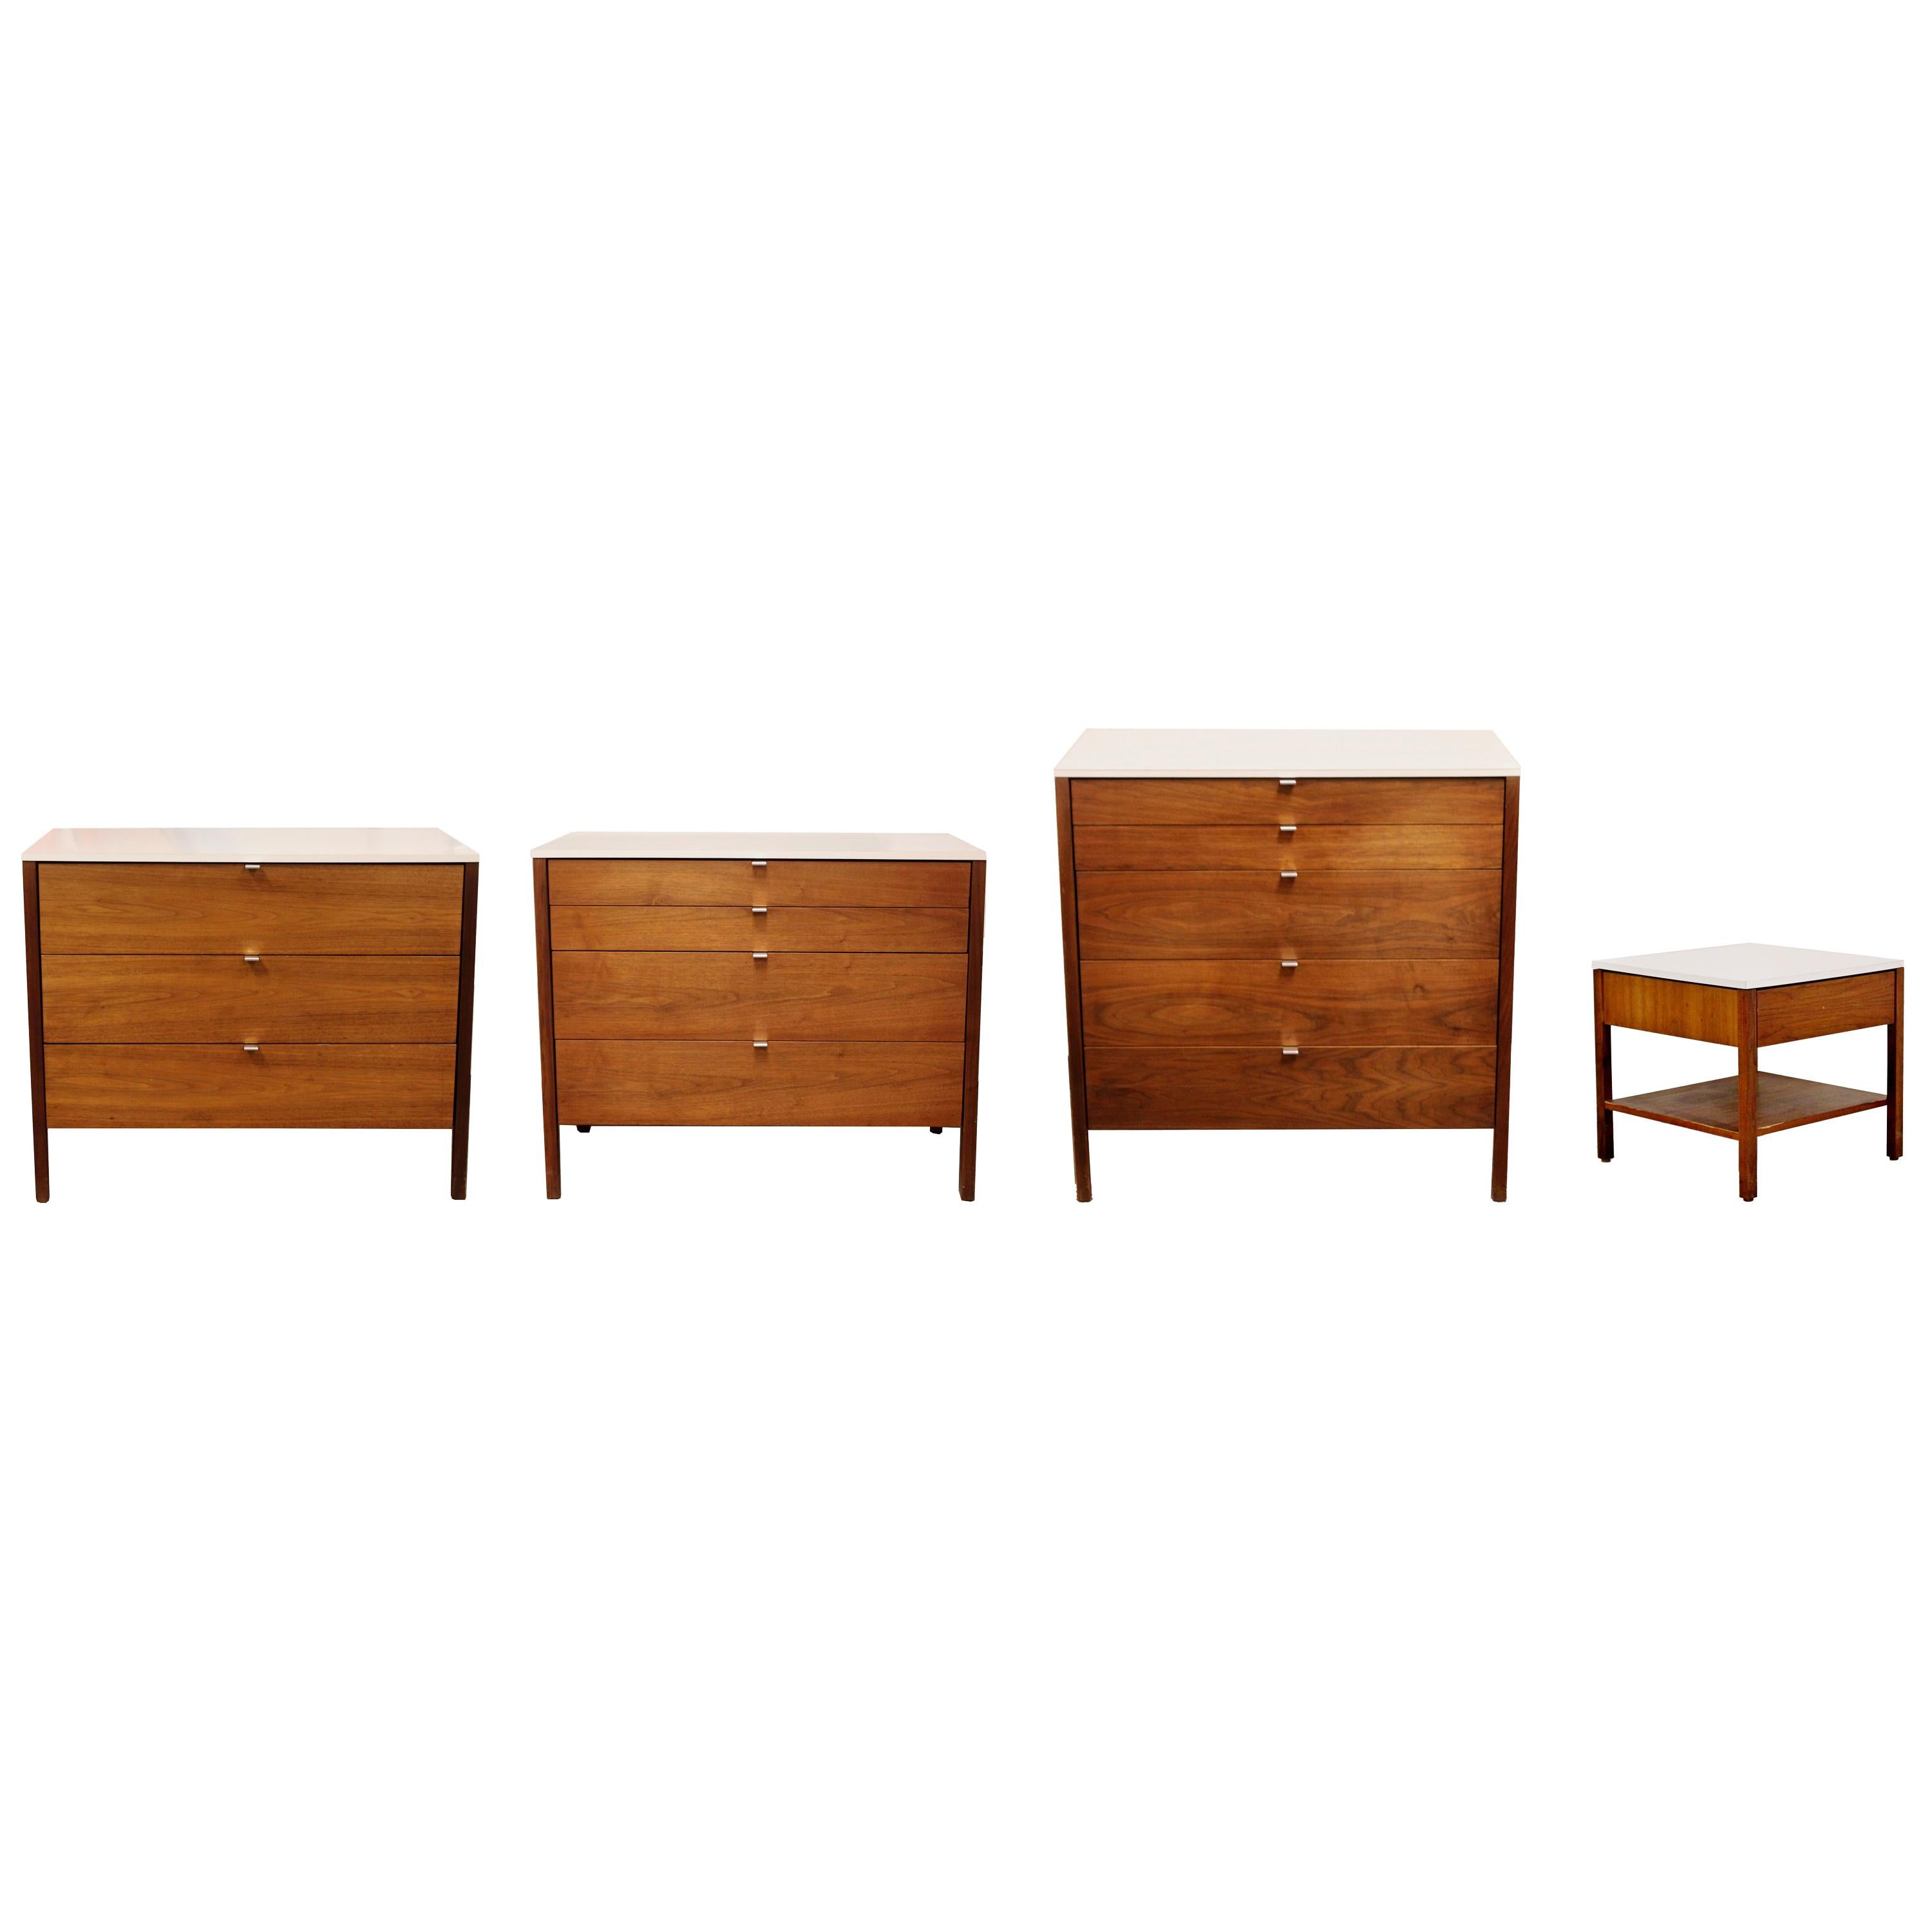 Mid-Century Modern Florence Knoll Bedroom Set of 3 Dressers and Nightstand